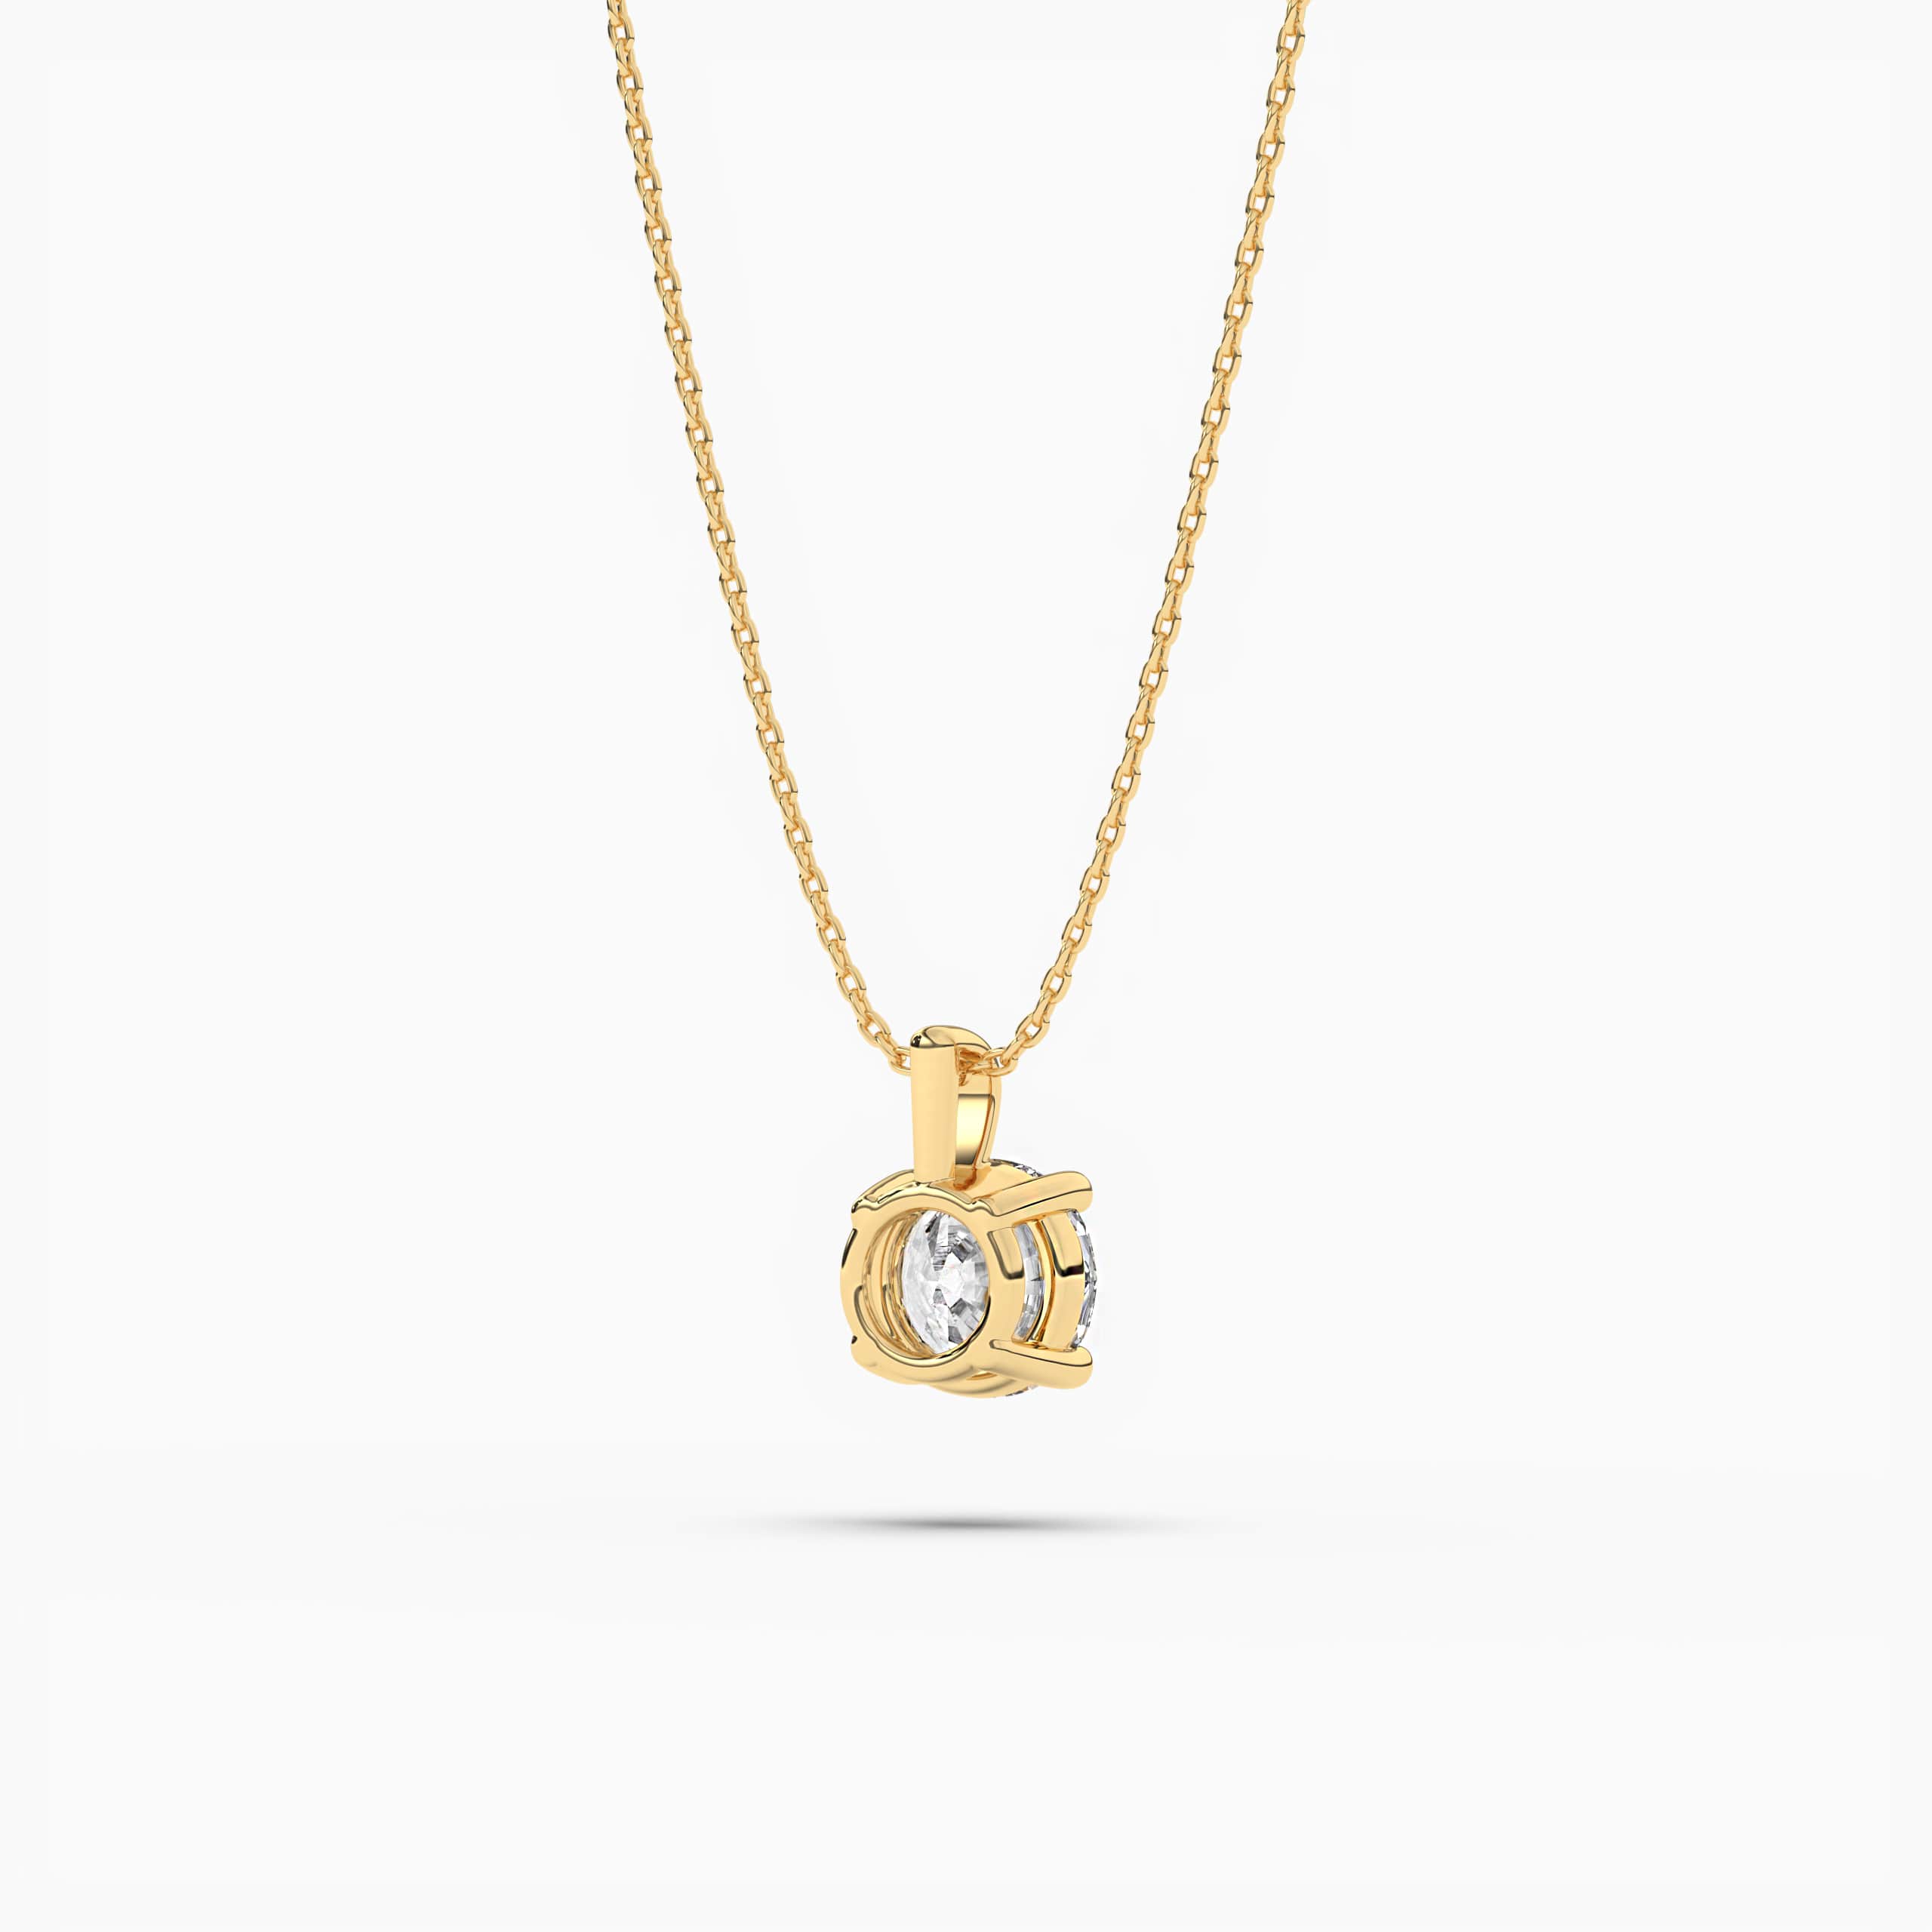 Round Cut  Solitaire Diamond Pendant Necklace Yellow Gold